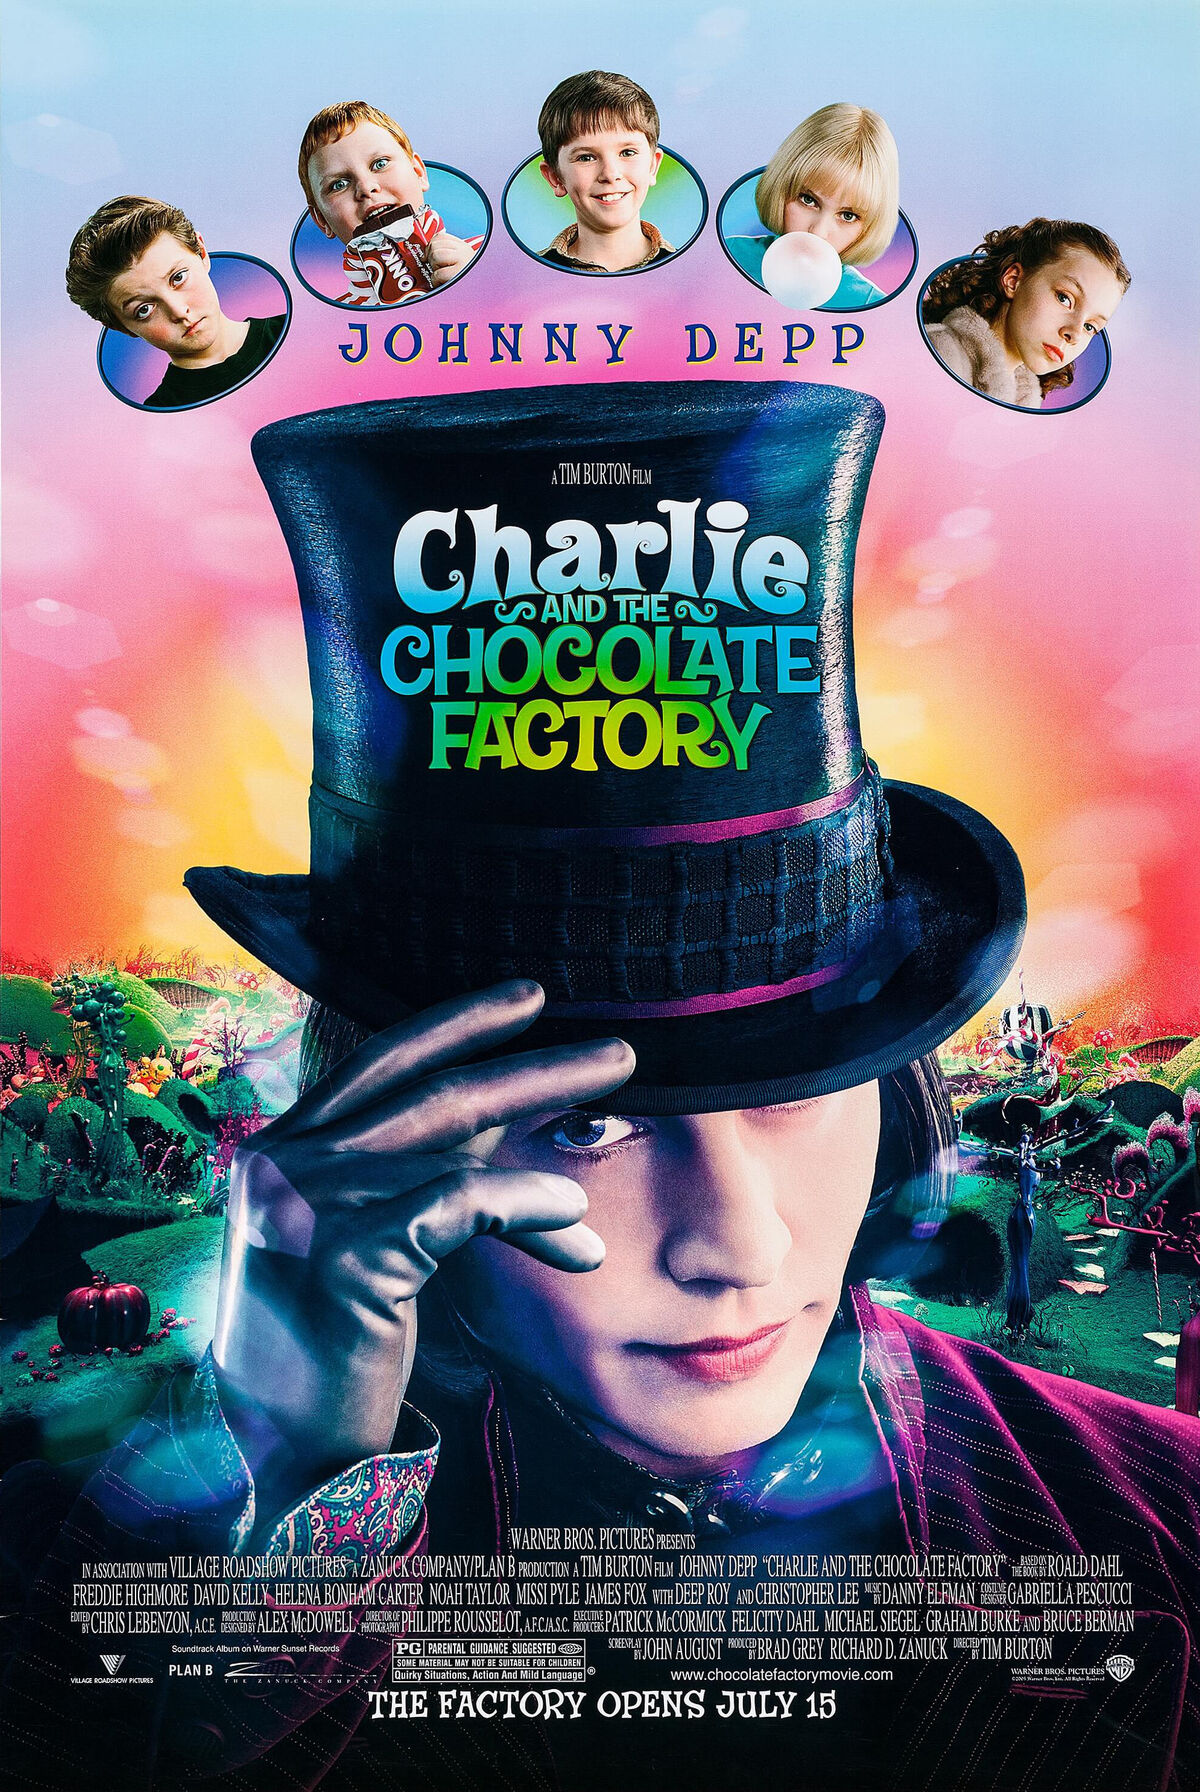 Charlie and the Chocolate Factory (film) Warner Bros pic